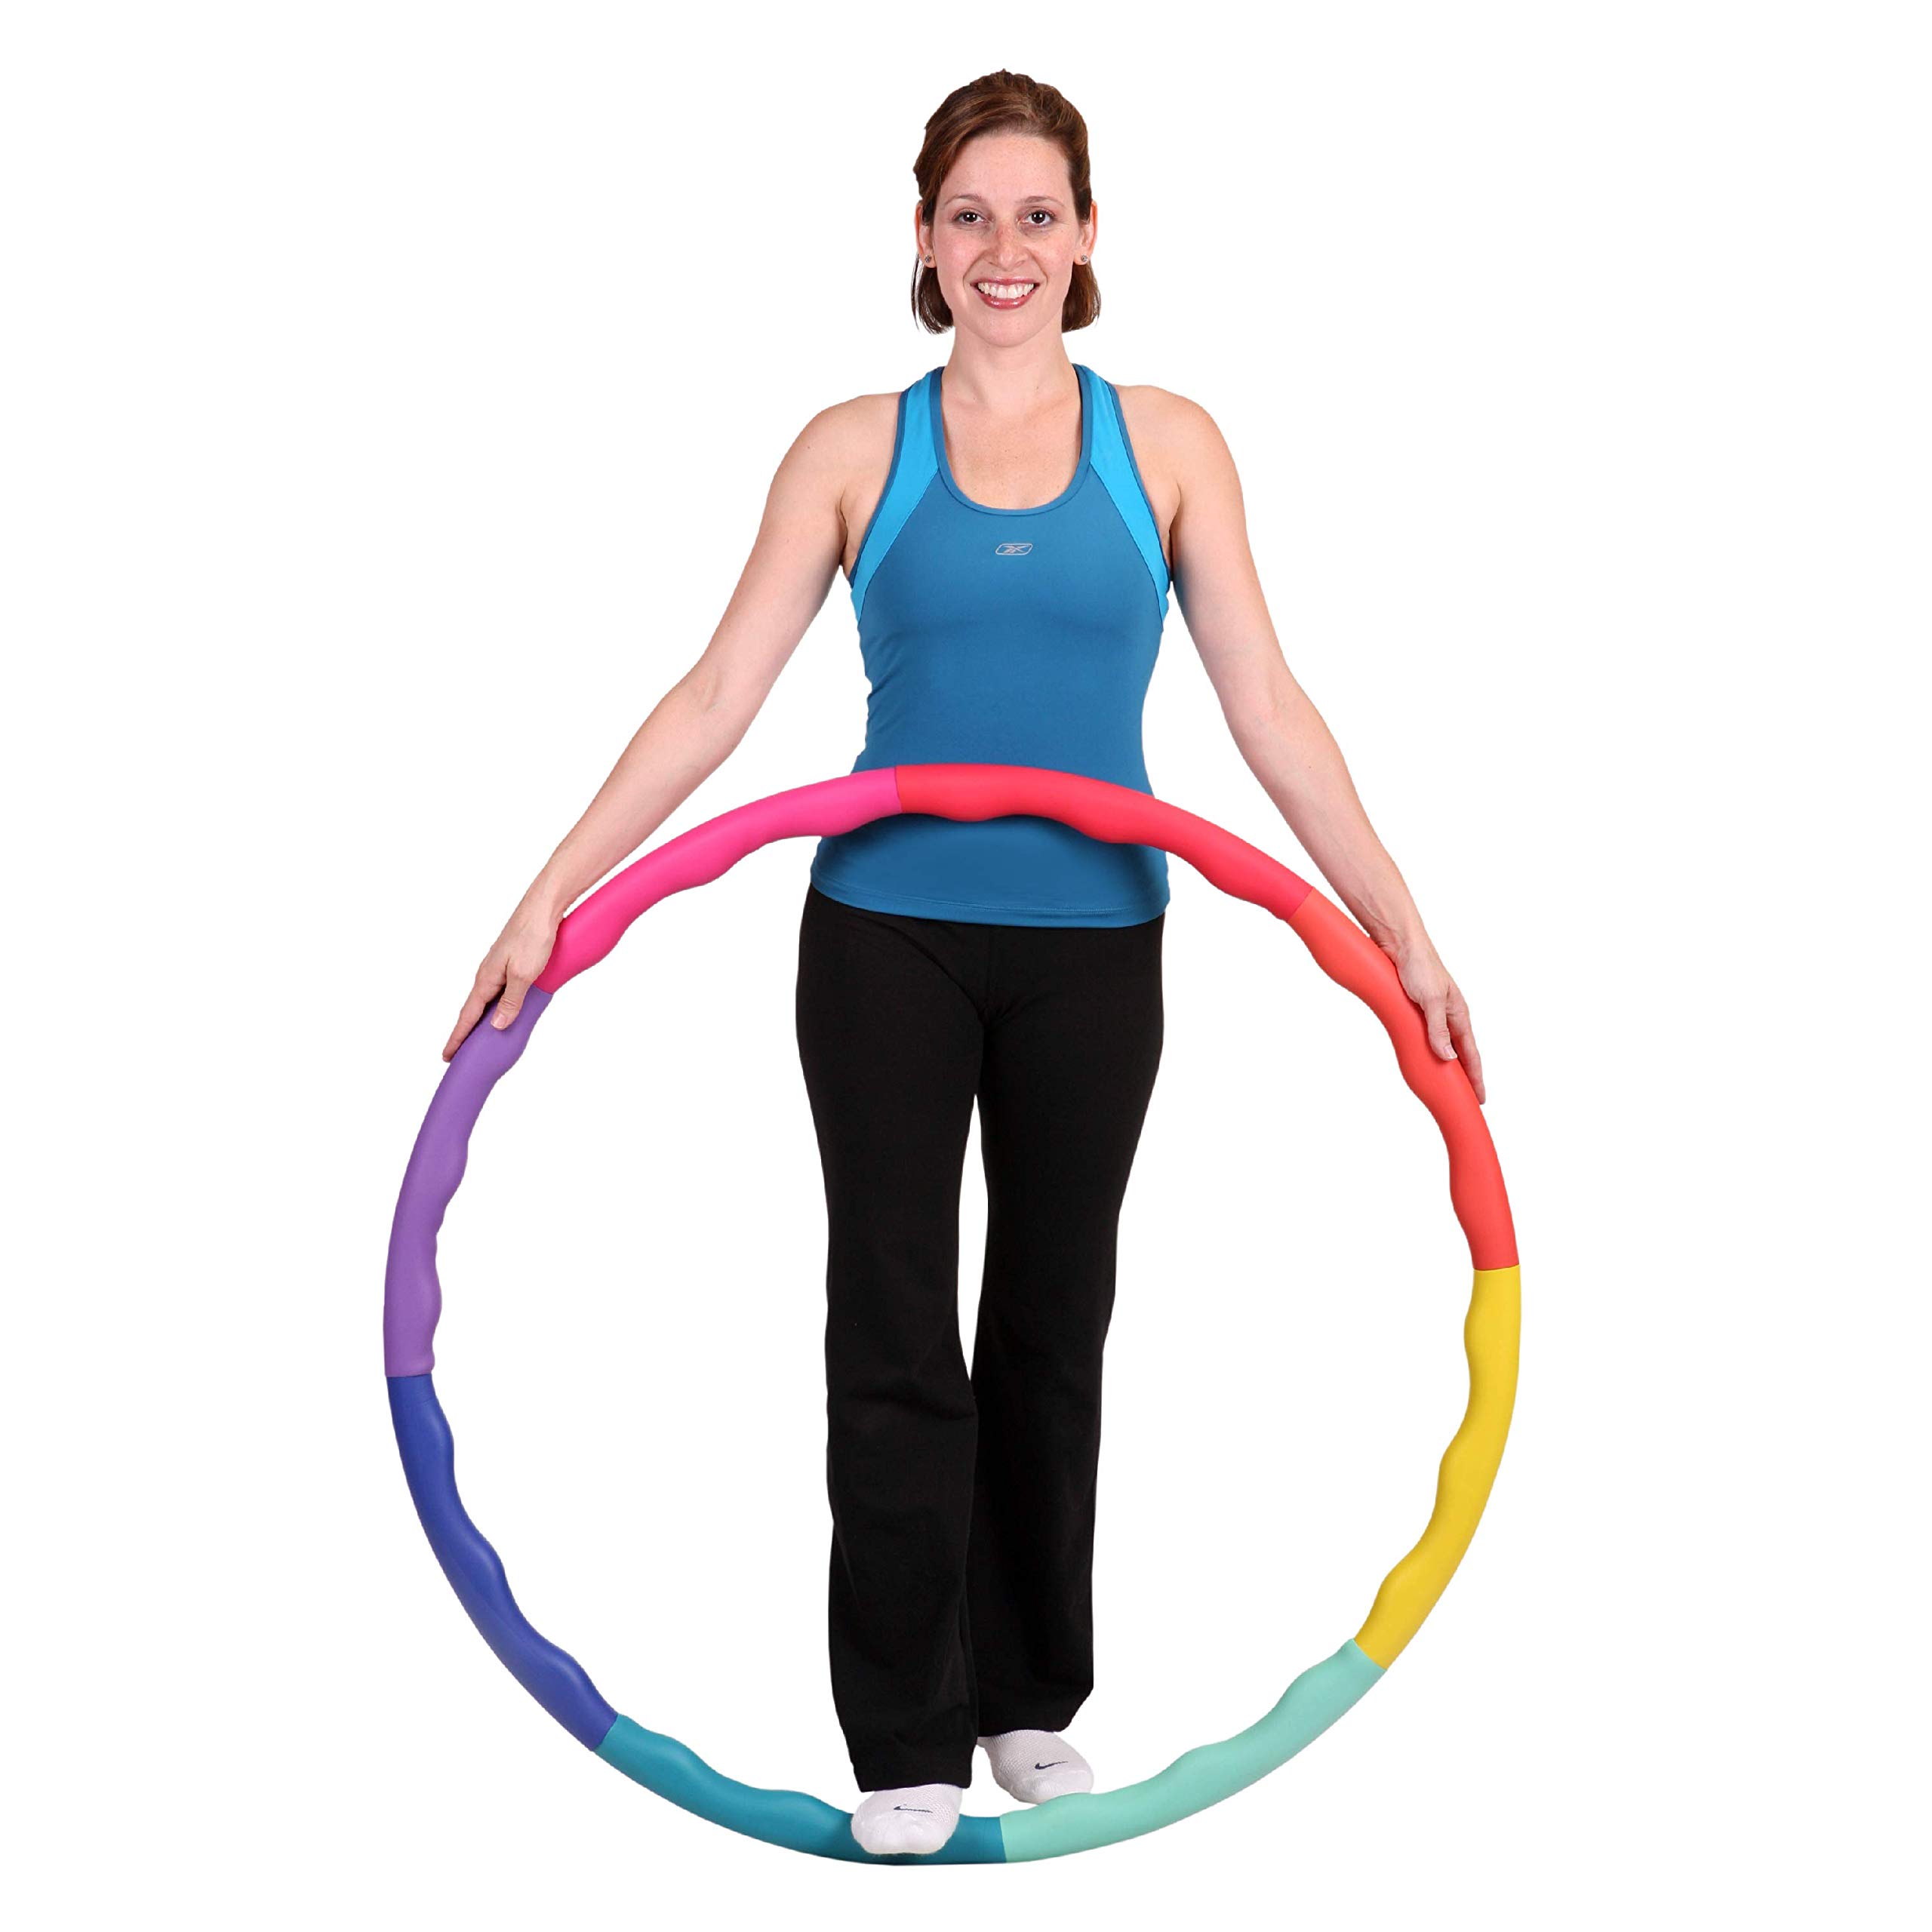 Sports Hoop Weighted Hula Hoop, ACU Hoop 3M - 3.2lb Medium, Weight Loss Fitness Exercise with Wavy Ridges (Rainbow Colors)